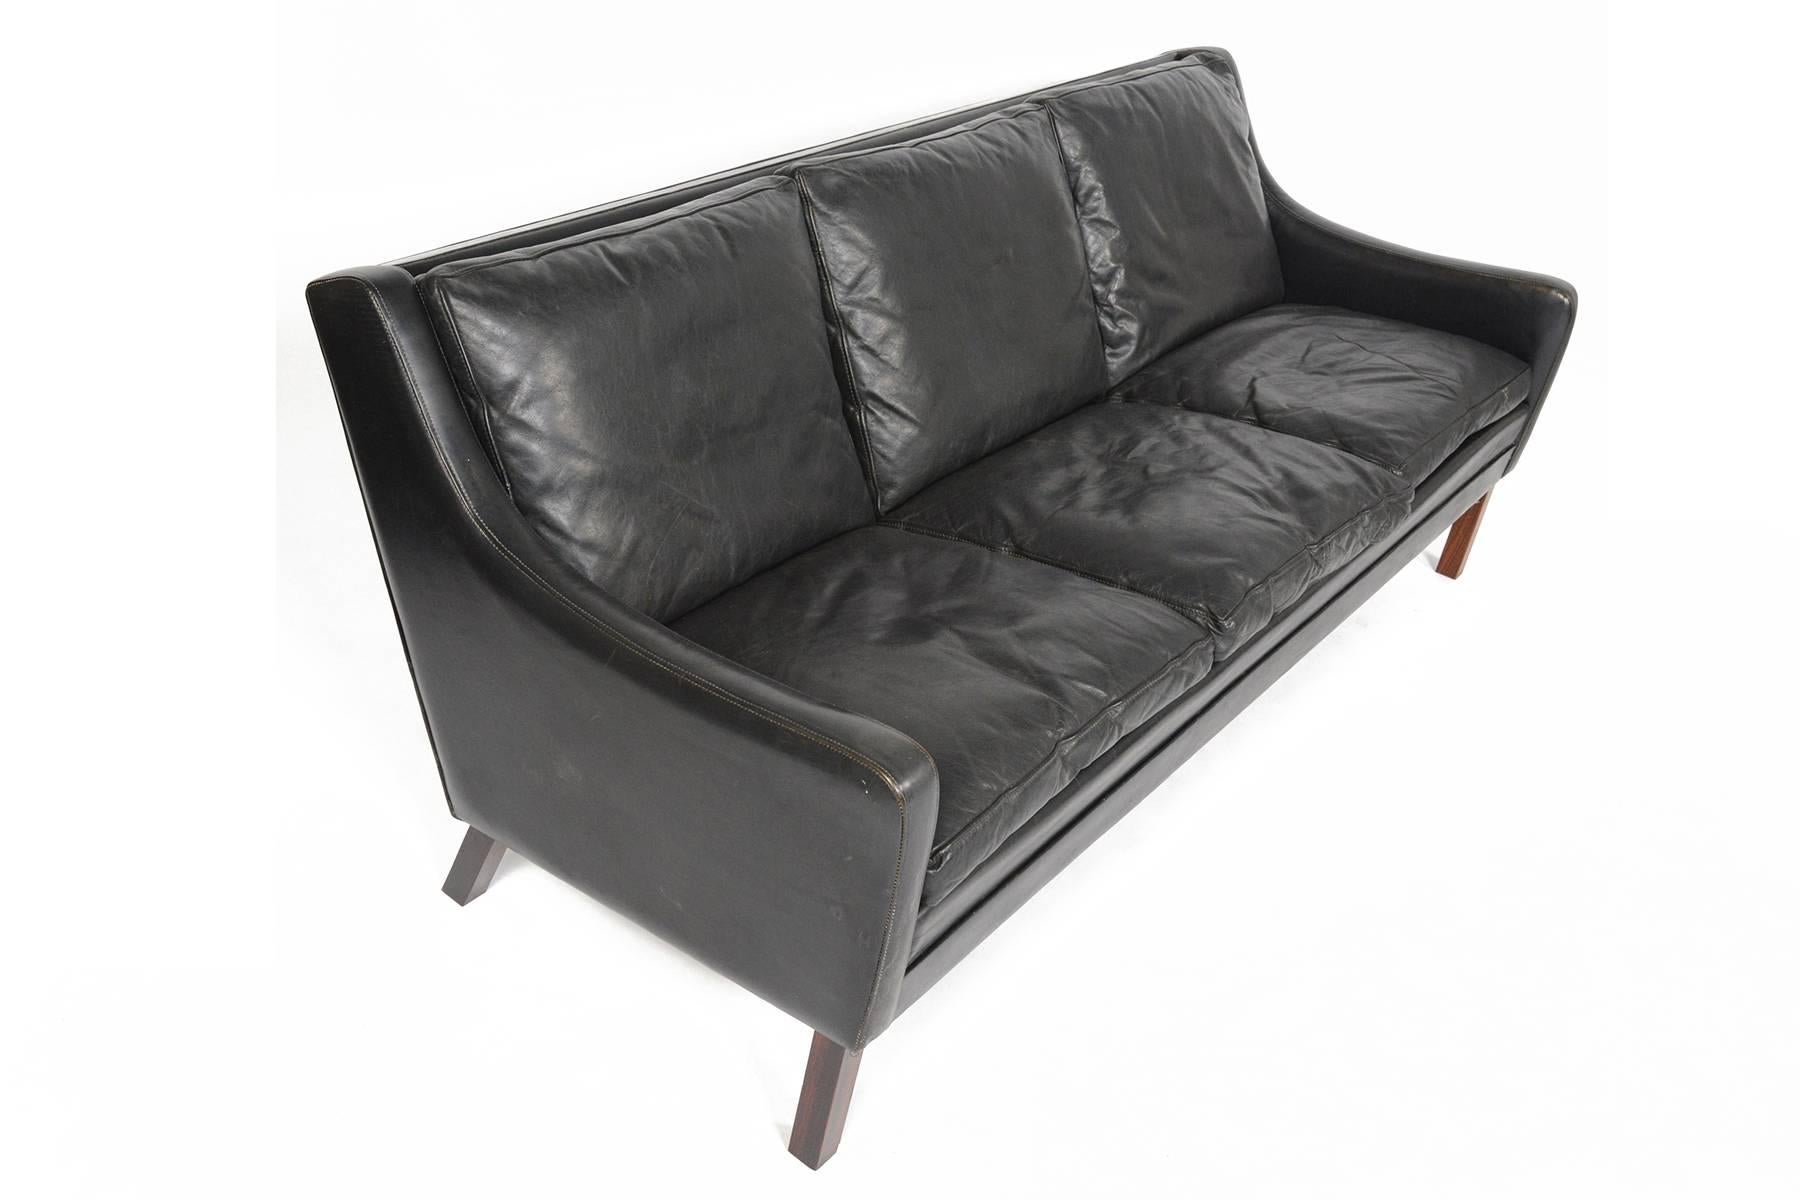 This Danish modern Mid-Century three seat sofa in black patinated leather is a staple of modern decor. This completely original sofa is covered in buttery soft leather and filled with down for an extra comfortable seating experience. Gorgeous